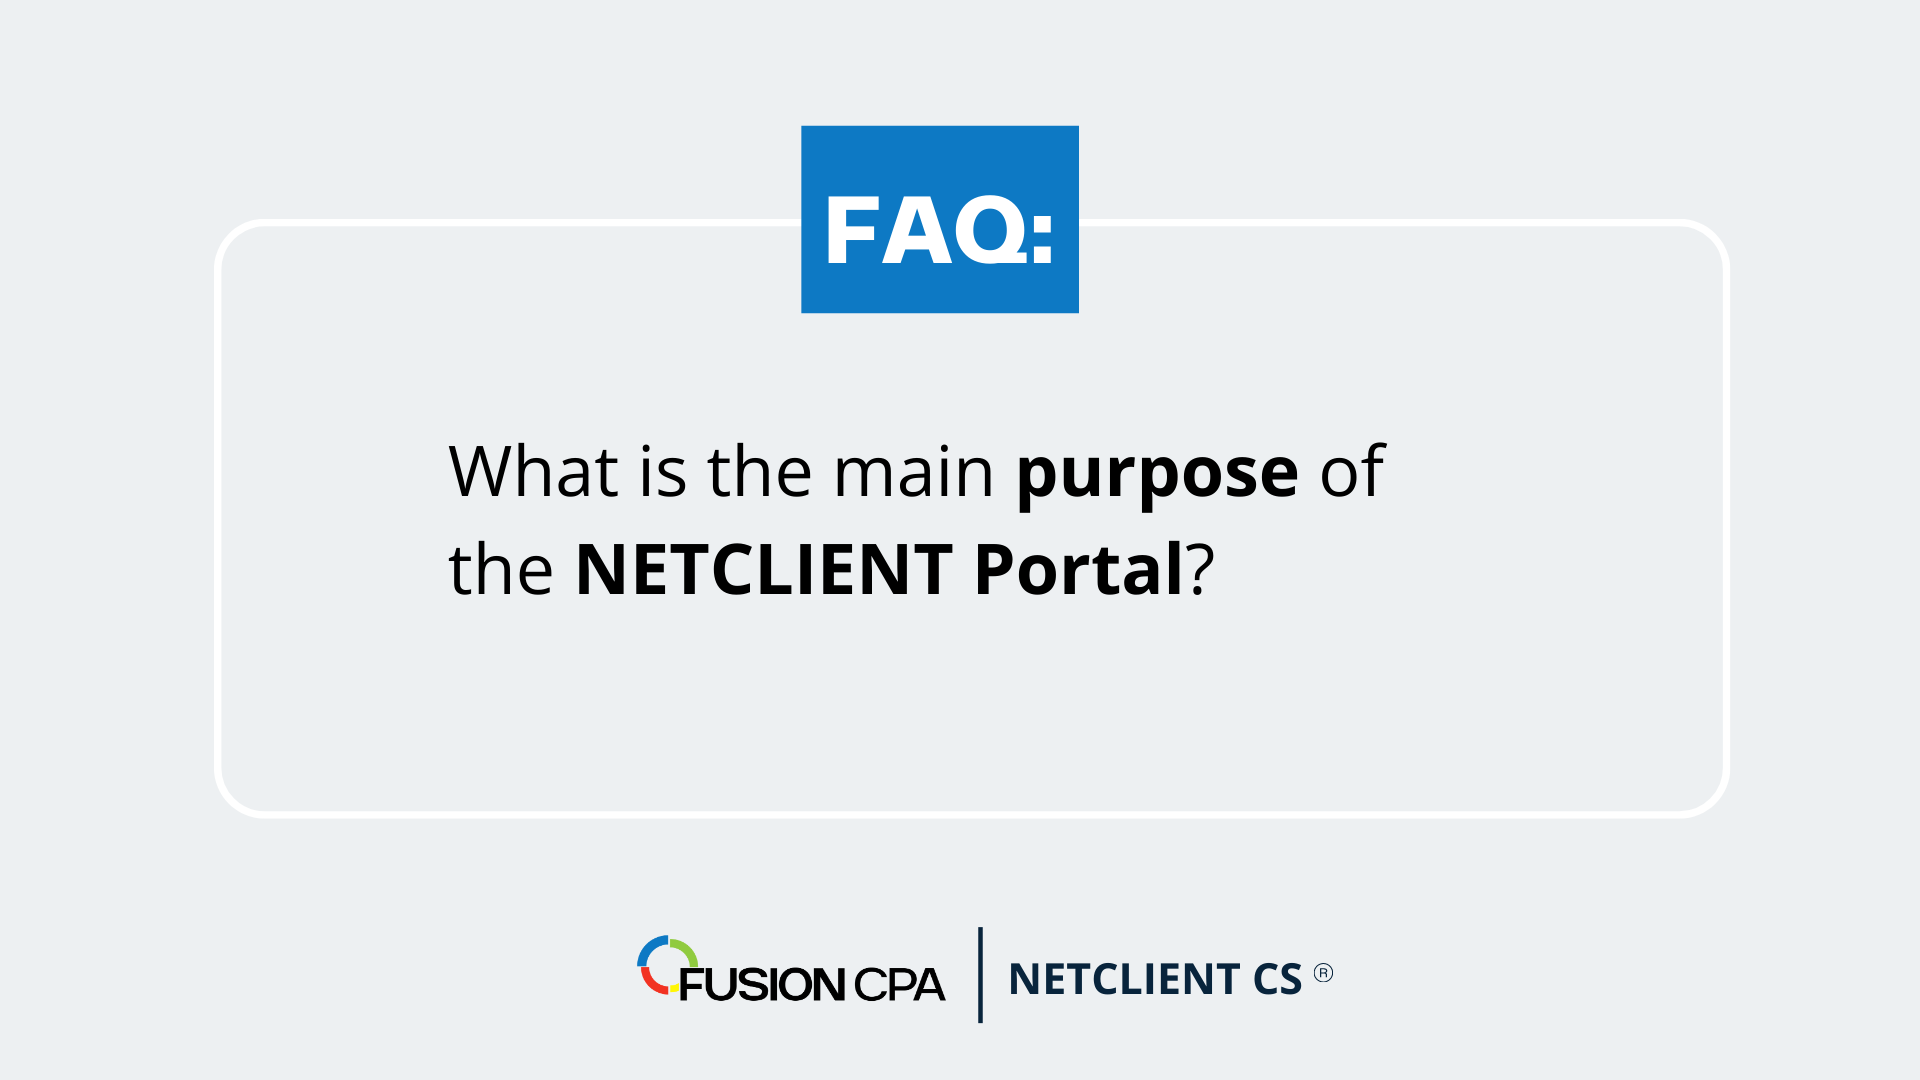 What's the main purpose of the Netclient portal? ​